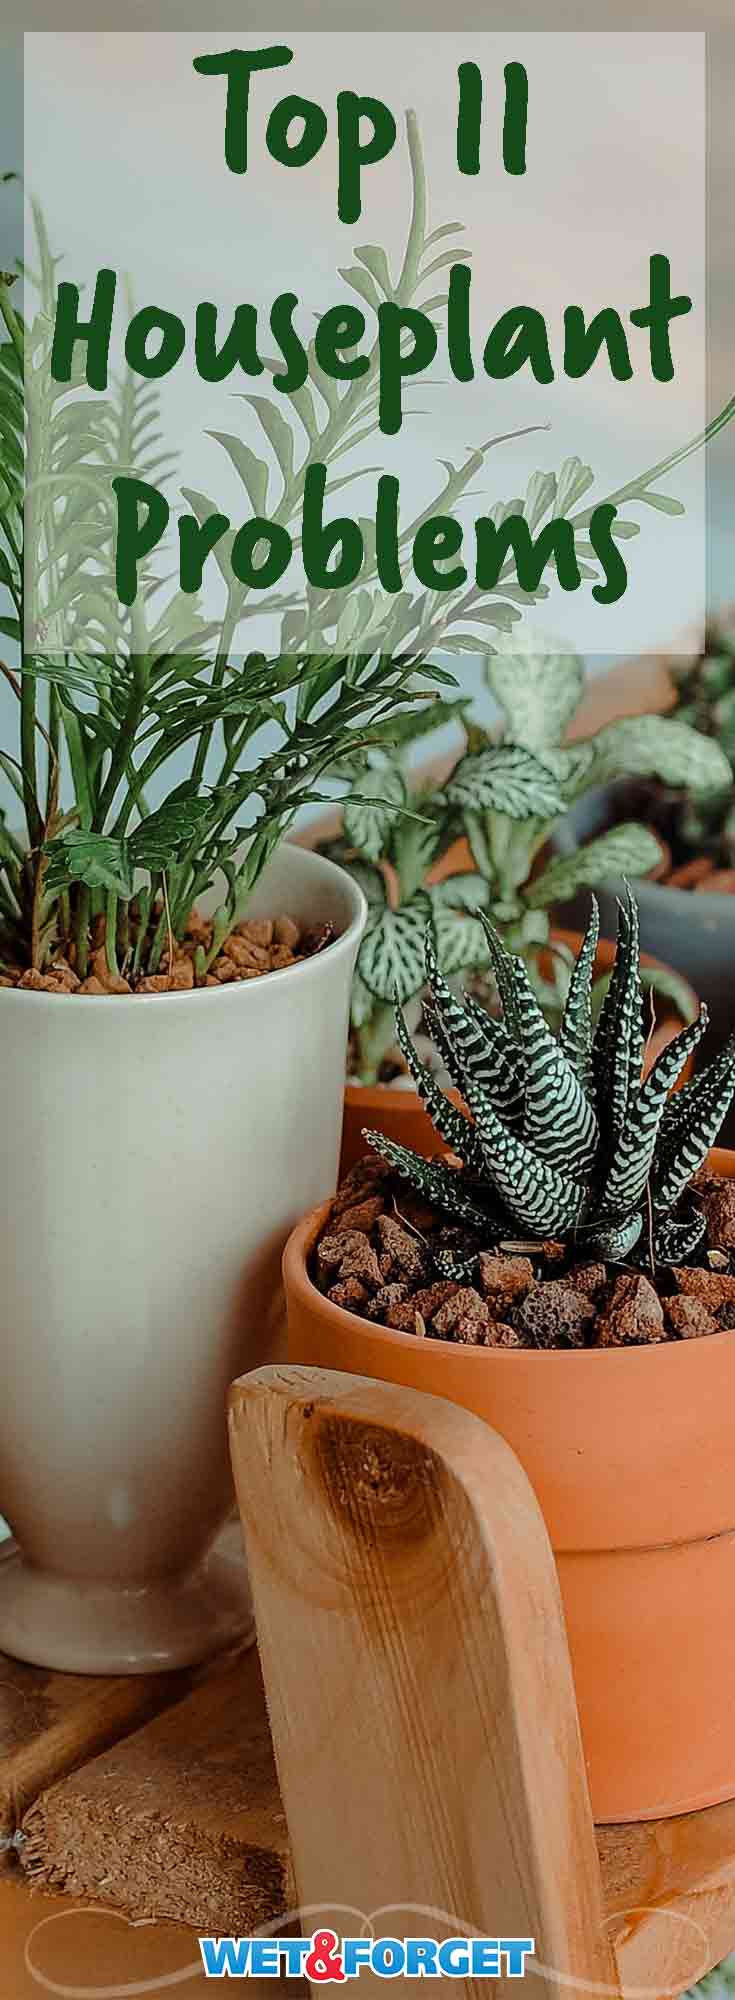 Discover what the most common houseplant problems are, learn how to identify them and fix them with our guide!